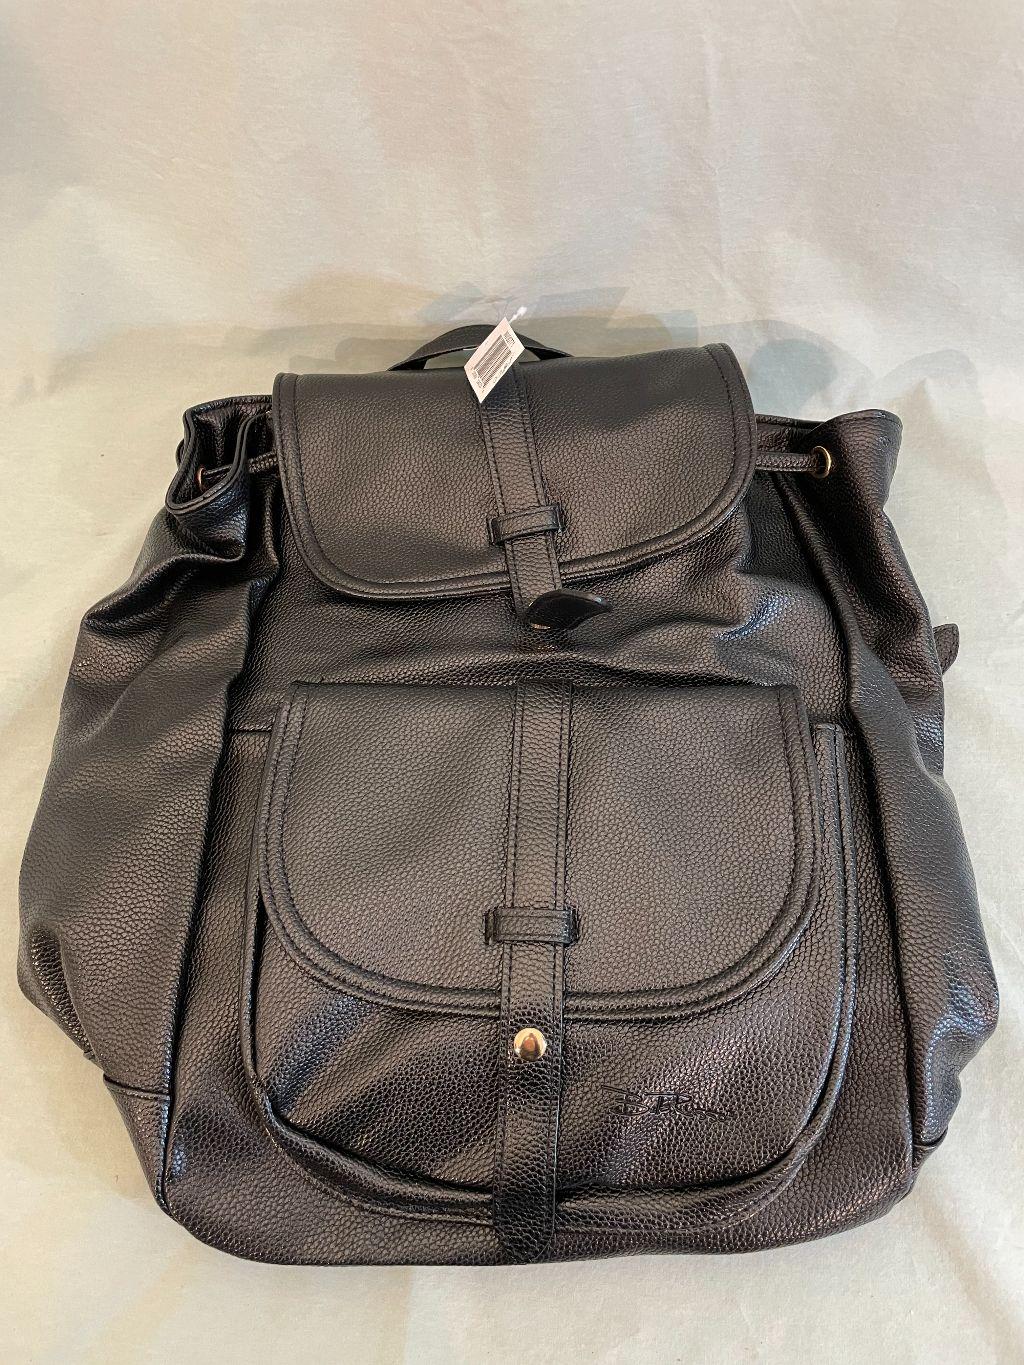 Bella Russo Backpack Purse